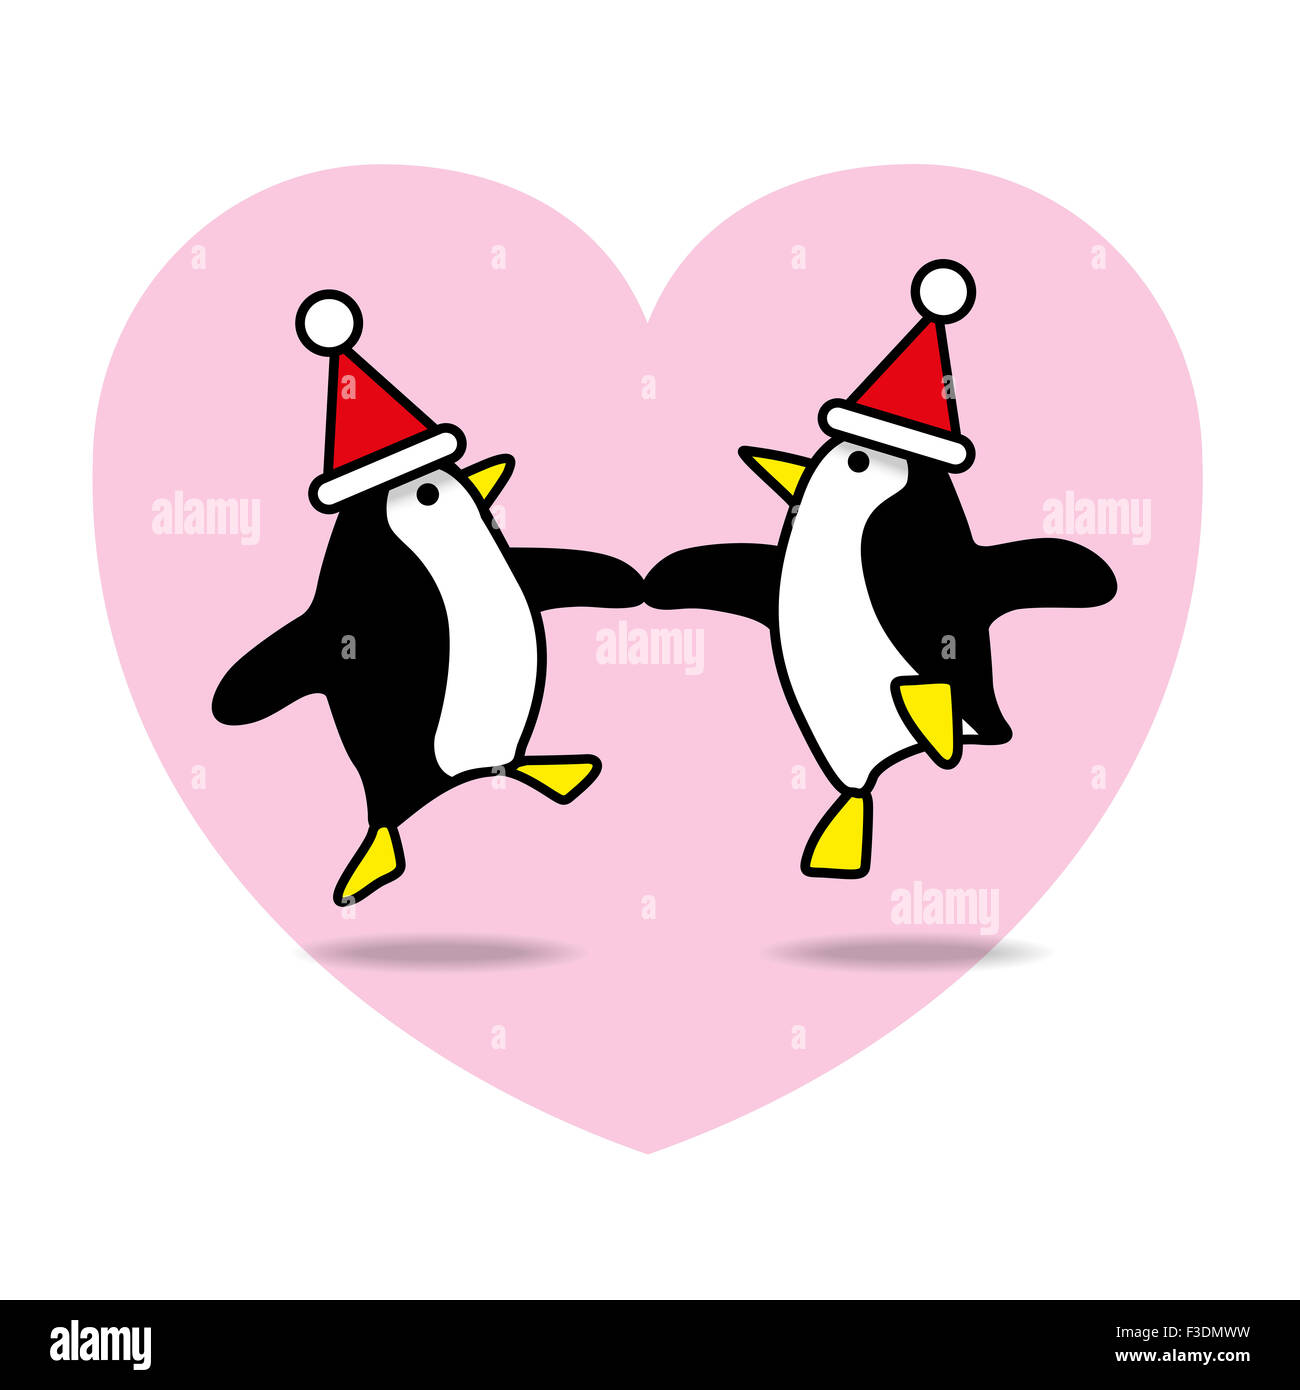 Two Happy Santa Penguins Dancing with Pink Heart on White Background Stock Photo